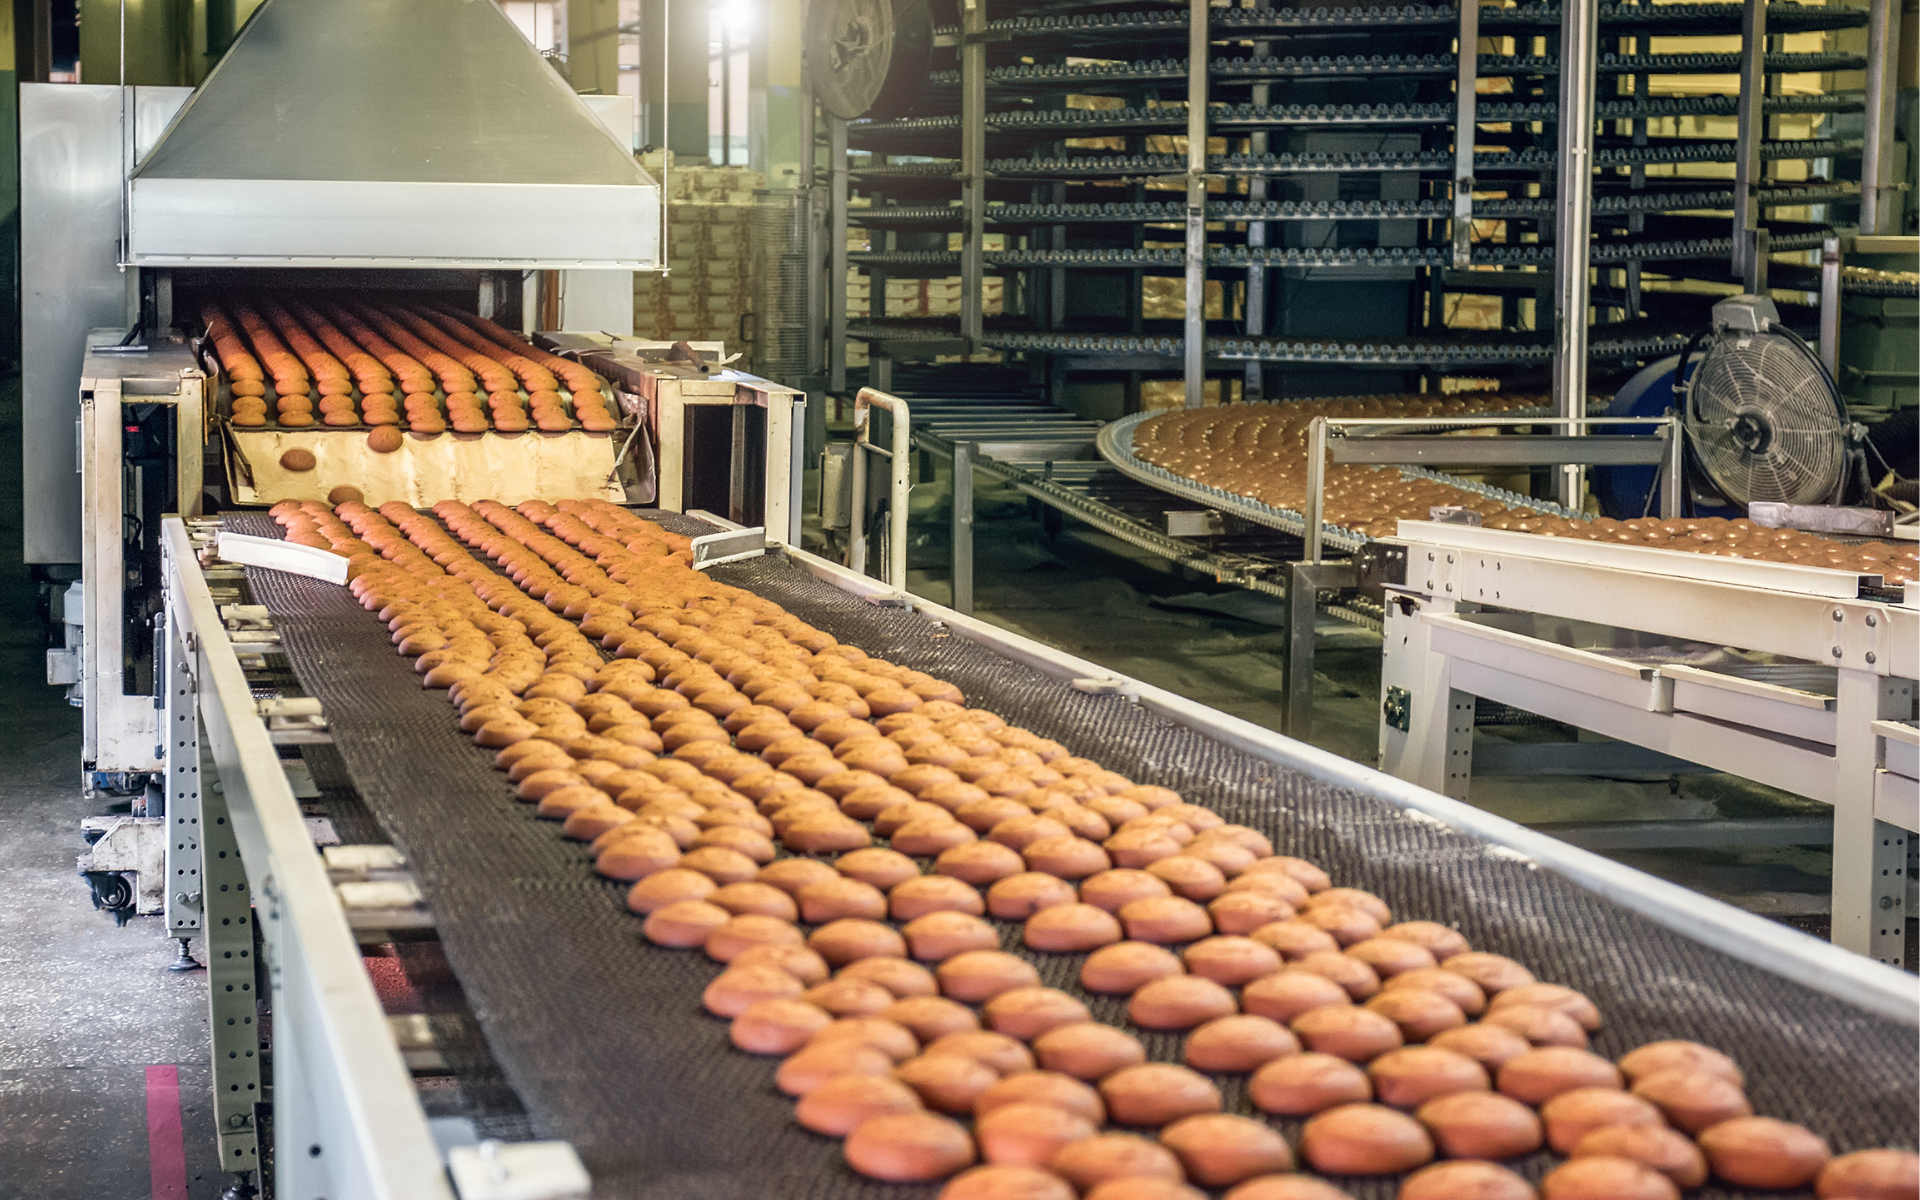 Cooling Conveyors in Baking Industry